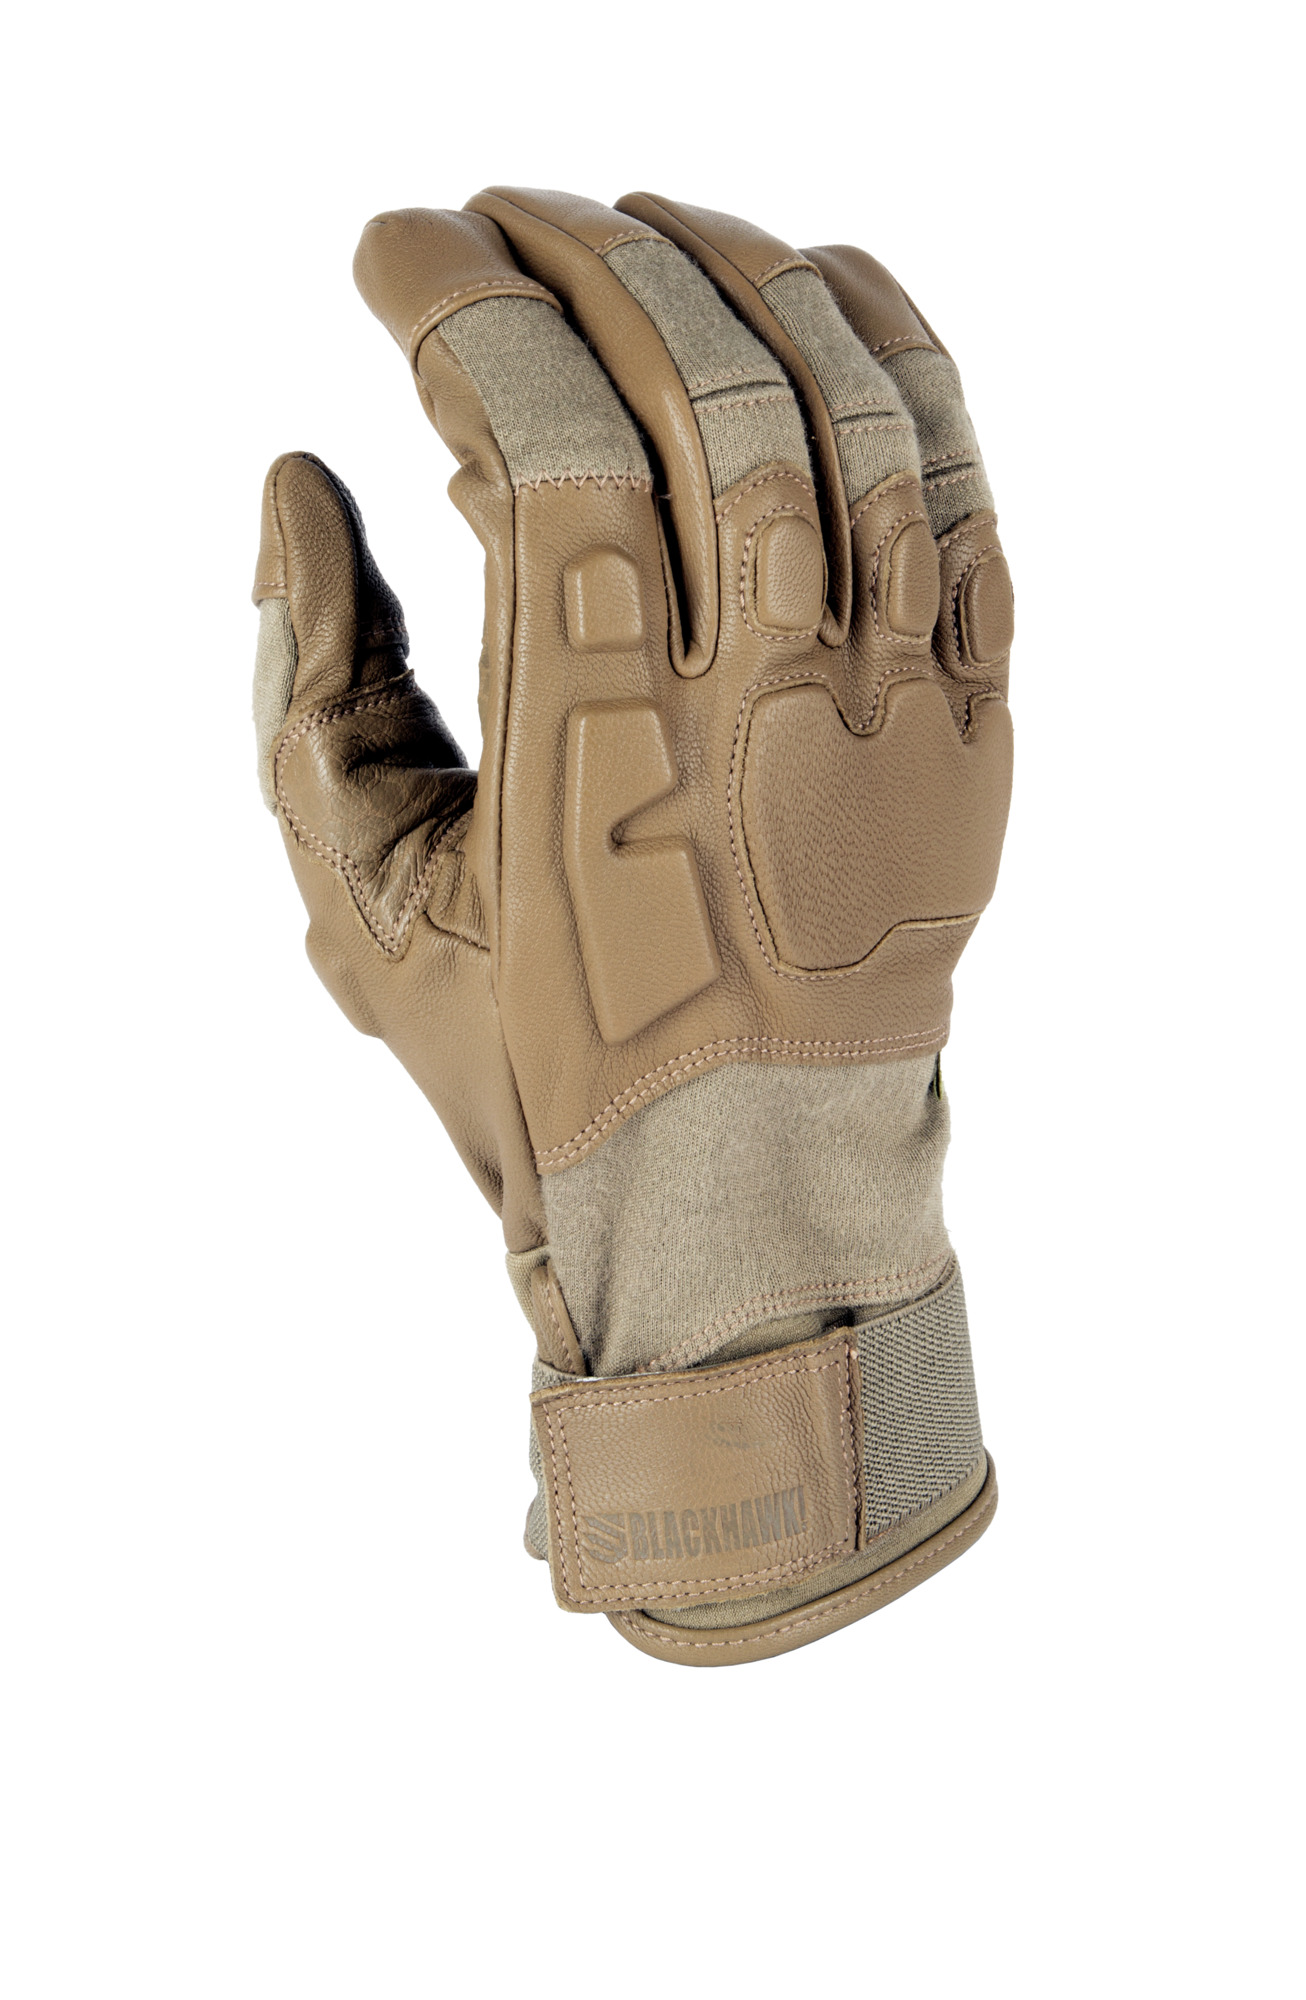 BlackHawk 8035 Extended Cuff  Search Gloves with Spectra Blackhawk Cut-Resistant 